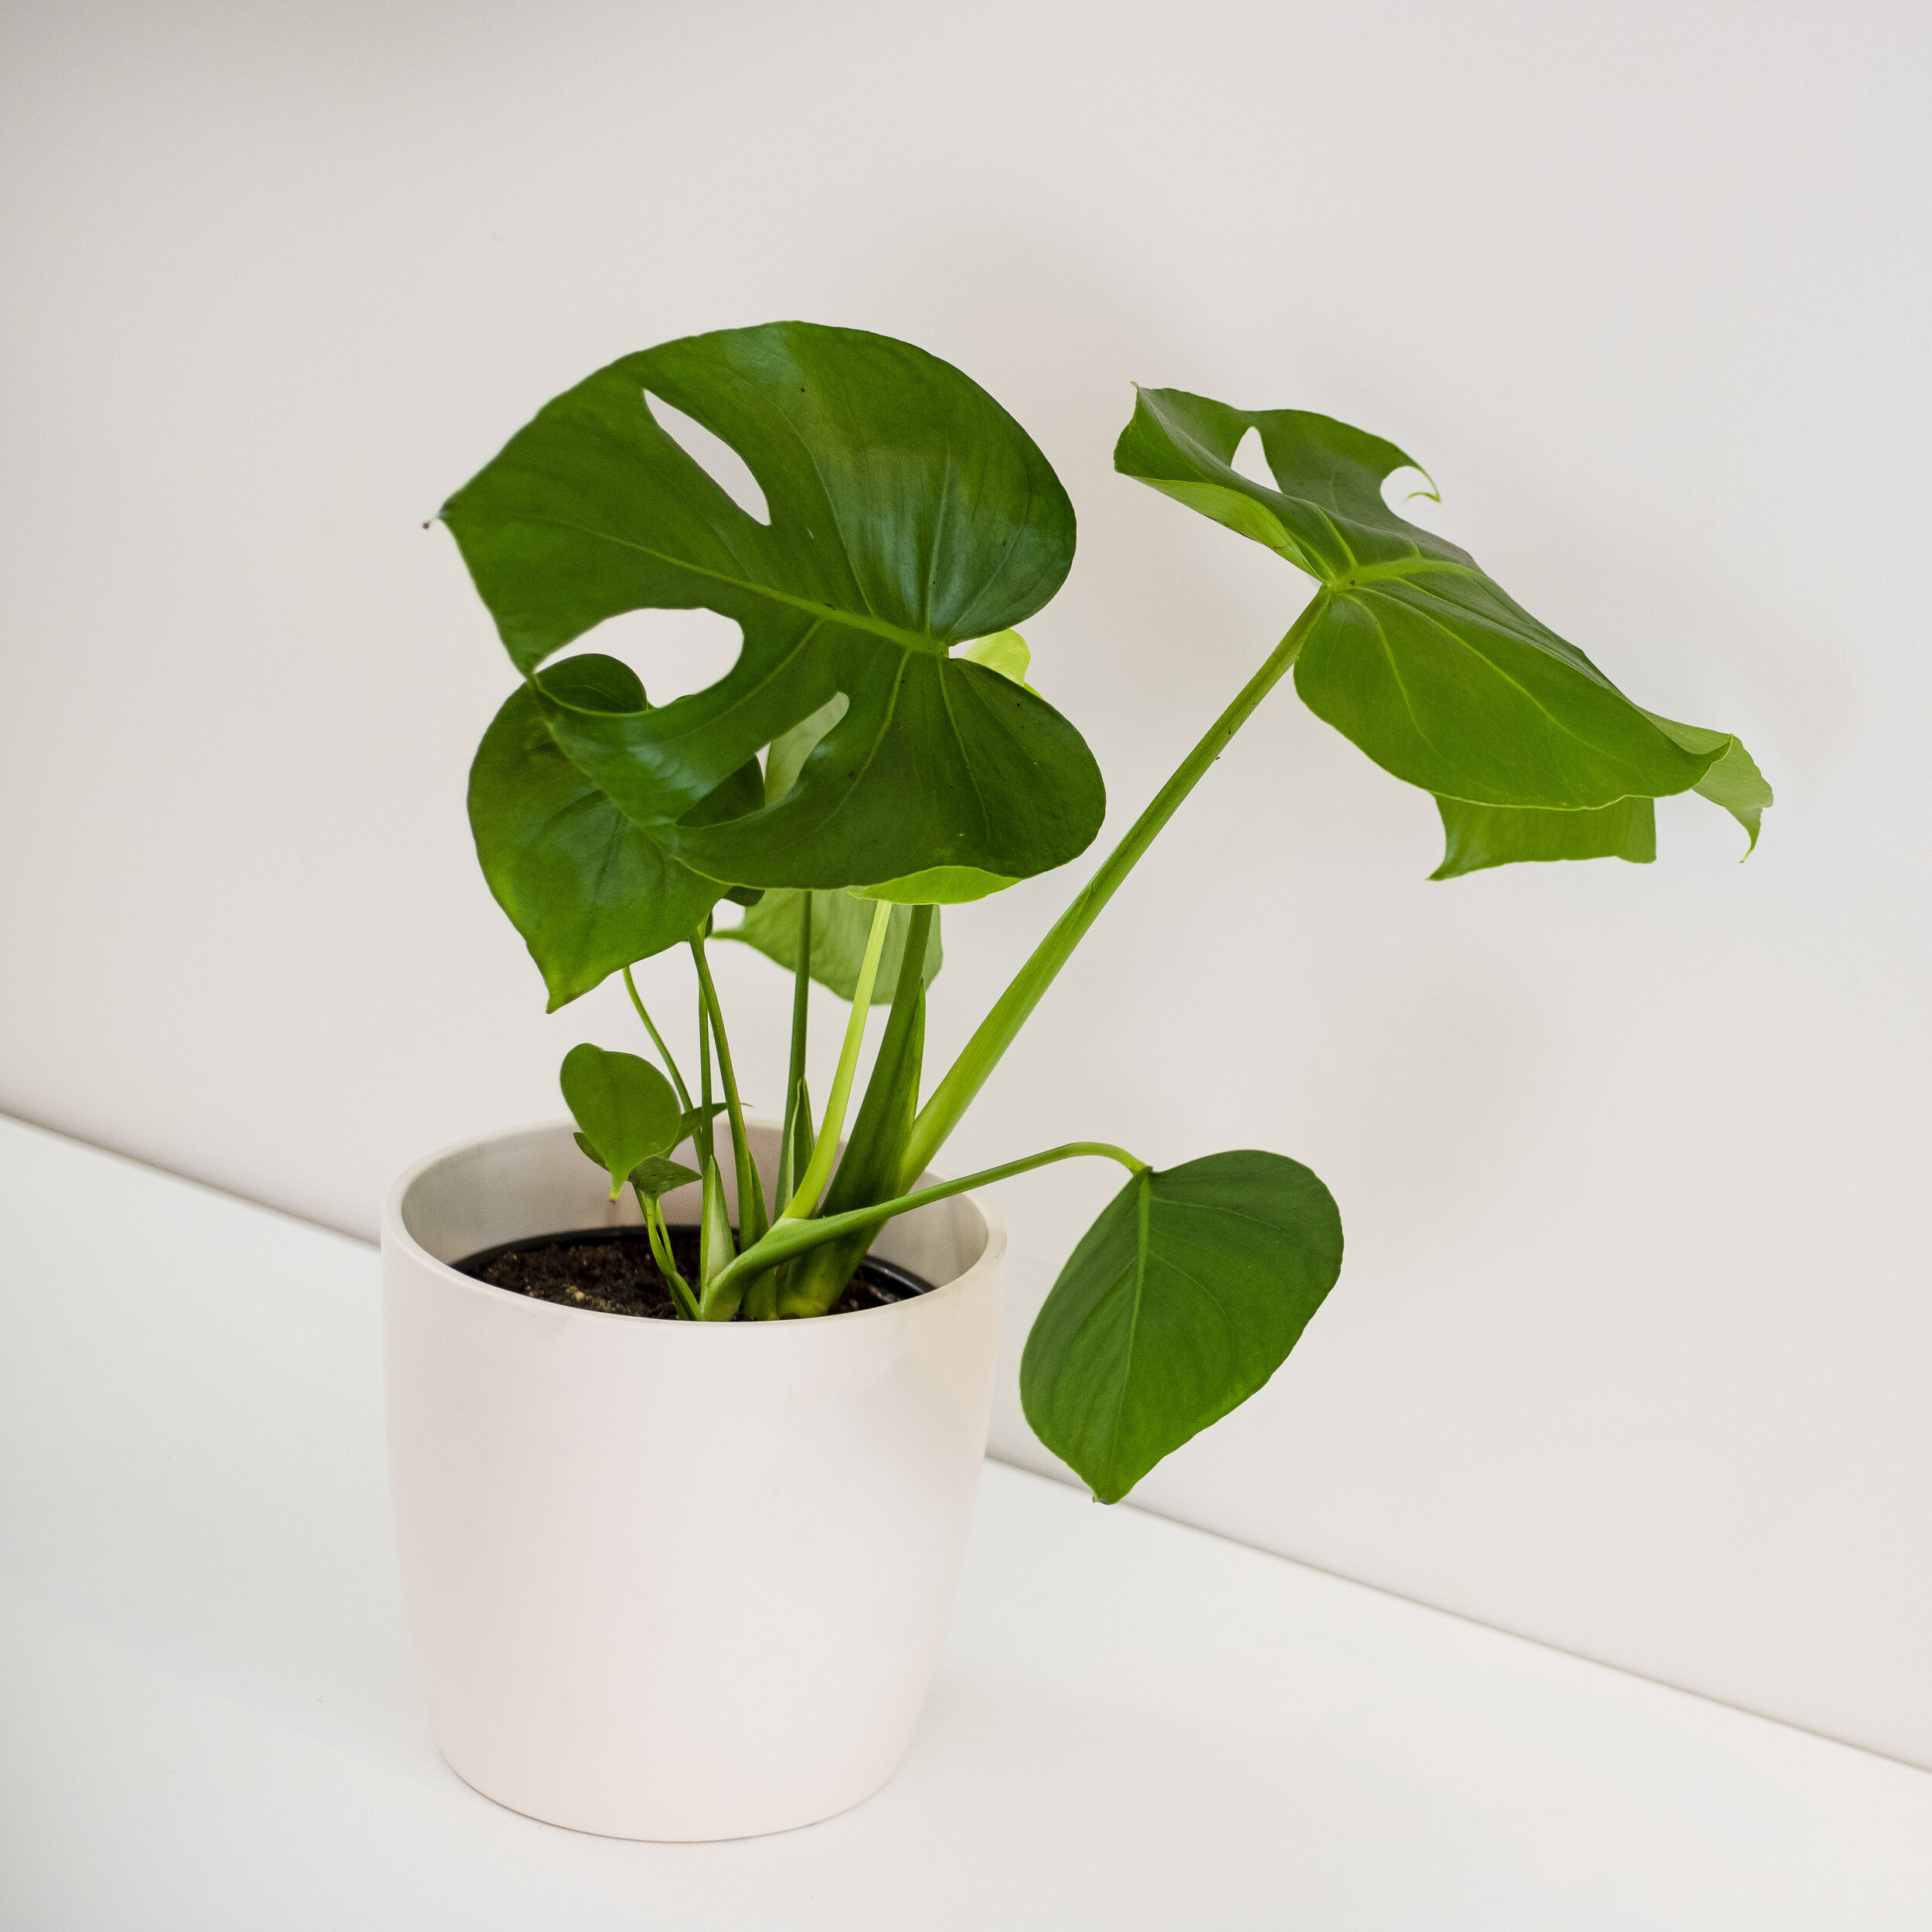 A green Monstera Deliciosa plant in a white pot sitting in front of a beige background